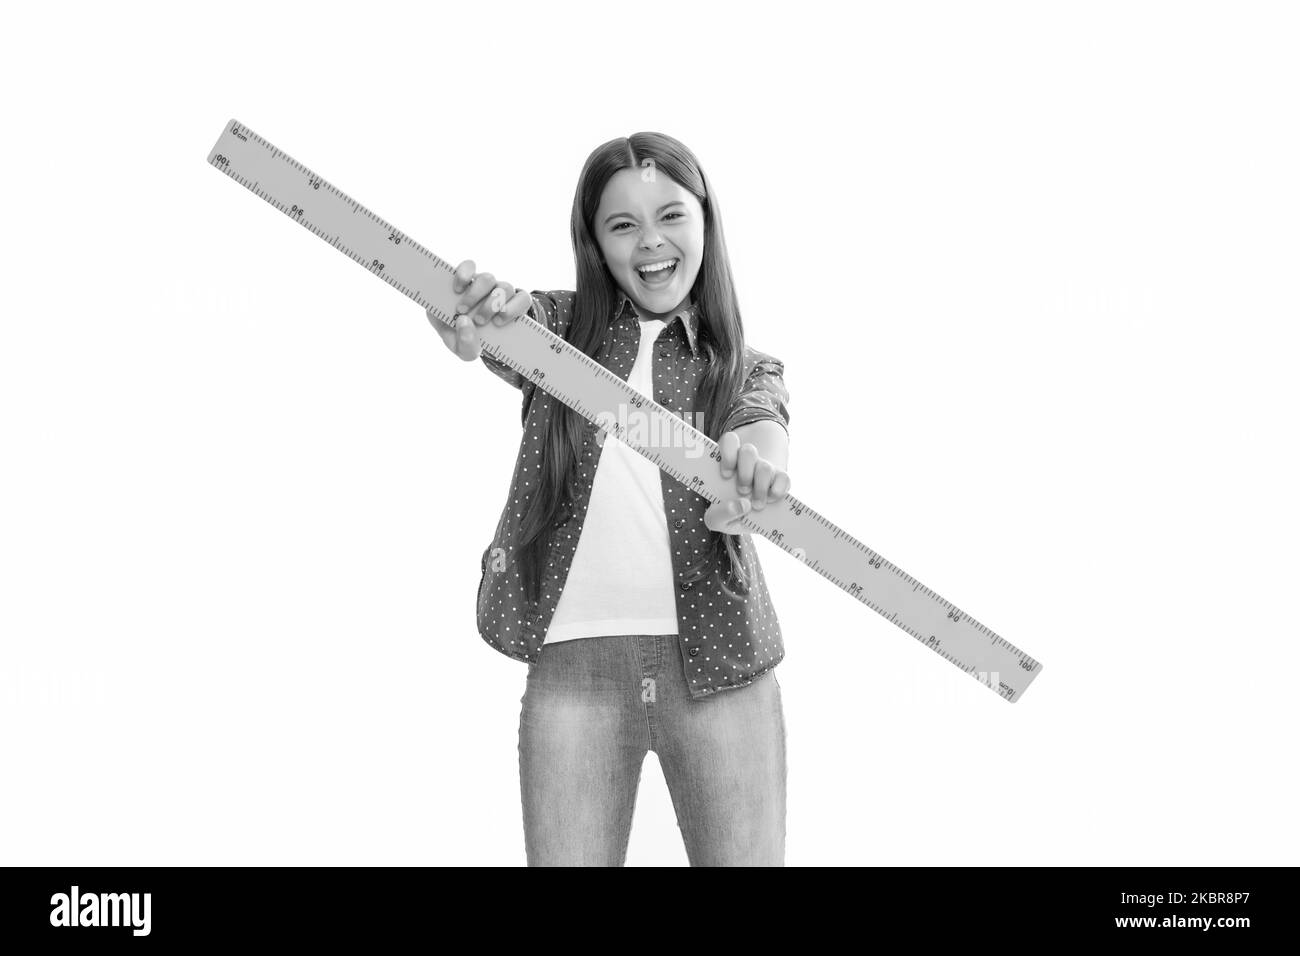 measuring and sizing. education for child. mathematics. cheerful teen girl with ruler. Stock Photo